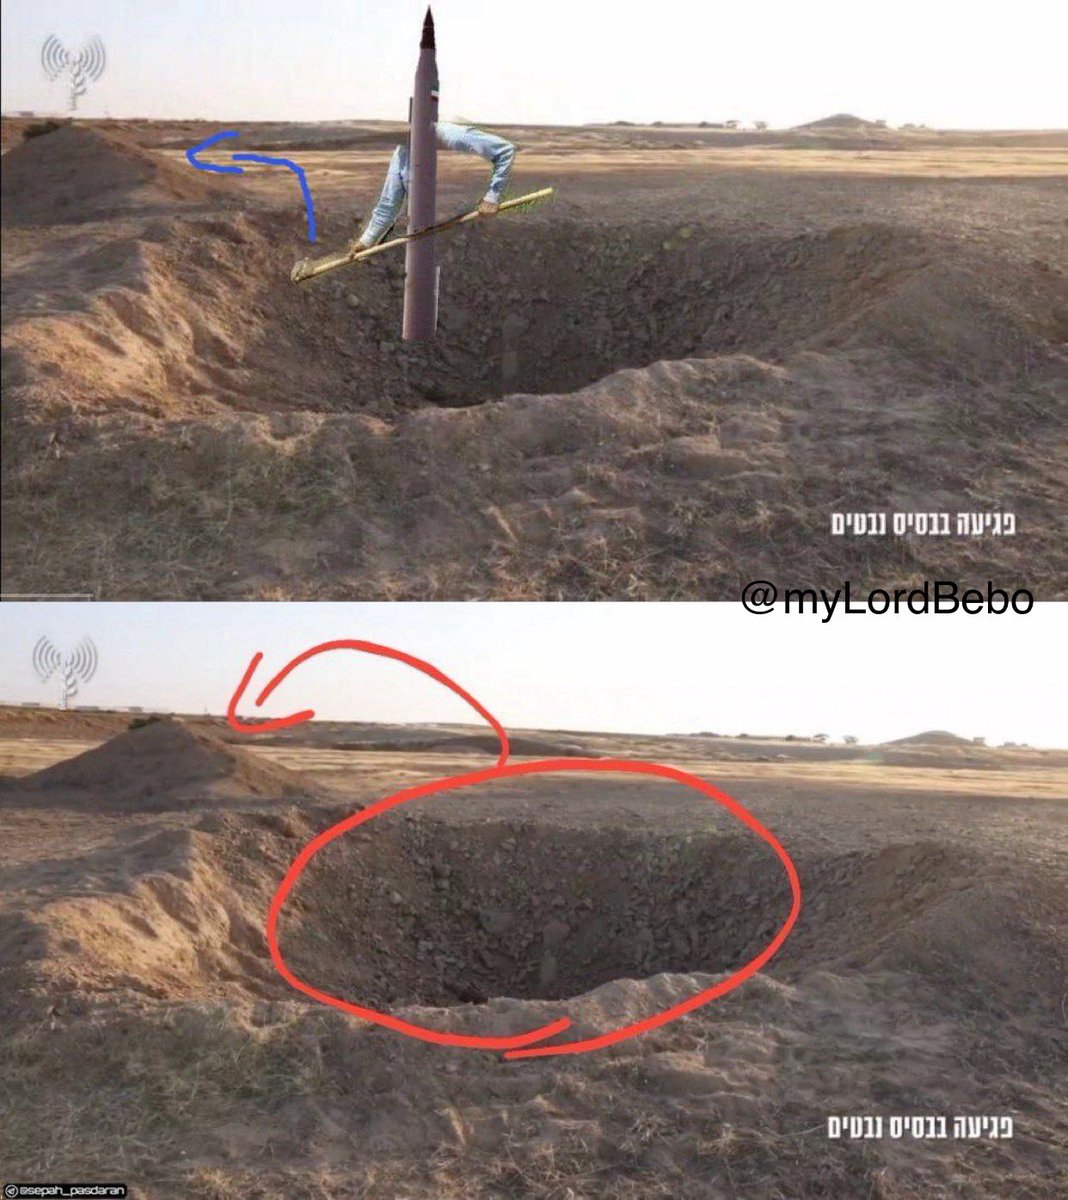 🇮🇷🇮🇱🚨‼️ BREAKING: Israel shows a clearly dug out hole instead of the real damage at the airbase hit by Iran! Now it looks like they’re faking it, to hide the real damage! WHAT ARE THEY HIDING?